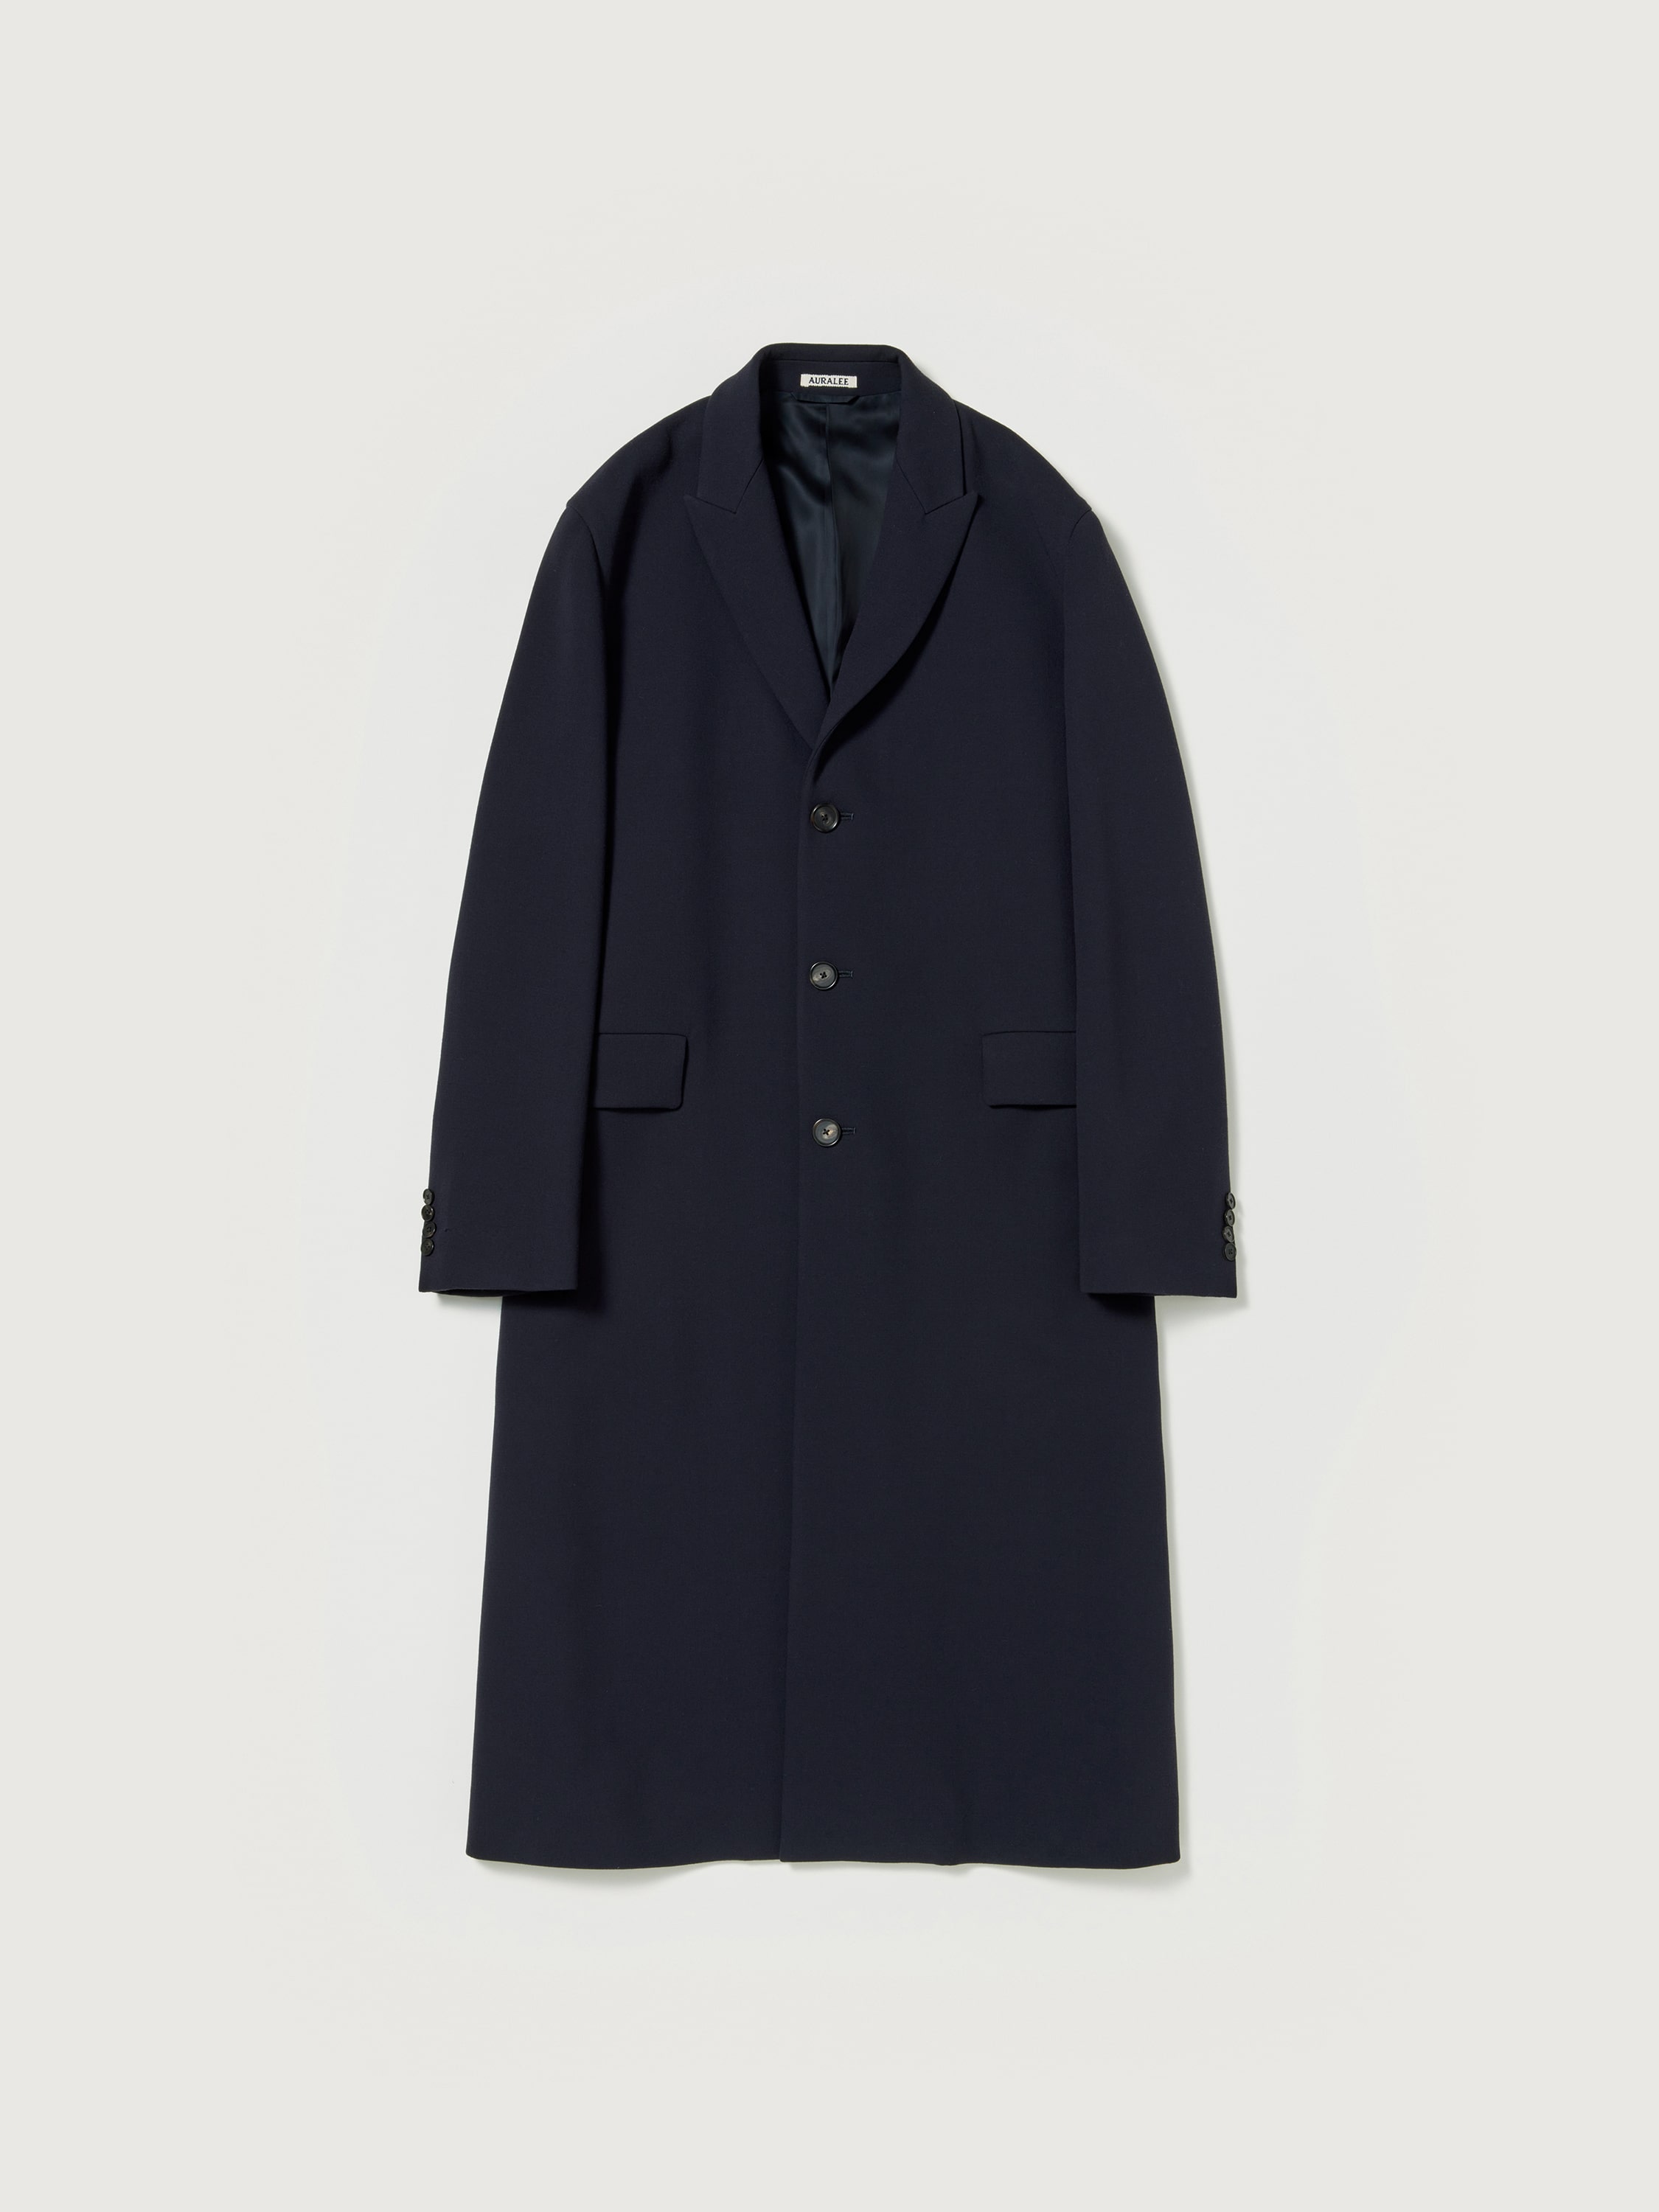 DOUBLE CLOTH HIGH COUNT WOOL CHESTERFIELD COAT 詳細画像 DARK NAVY 1